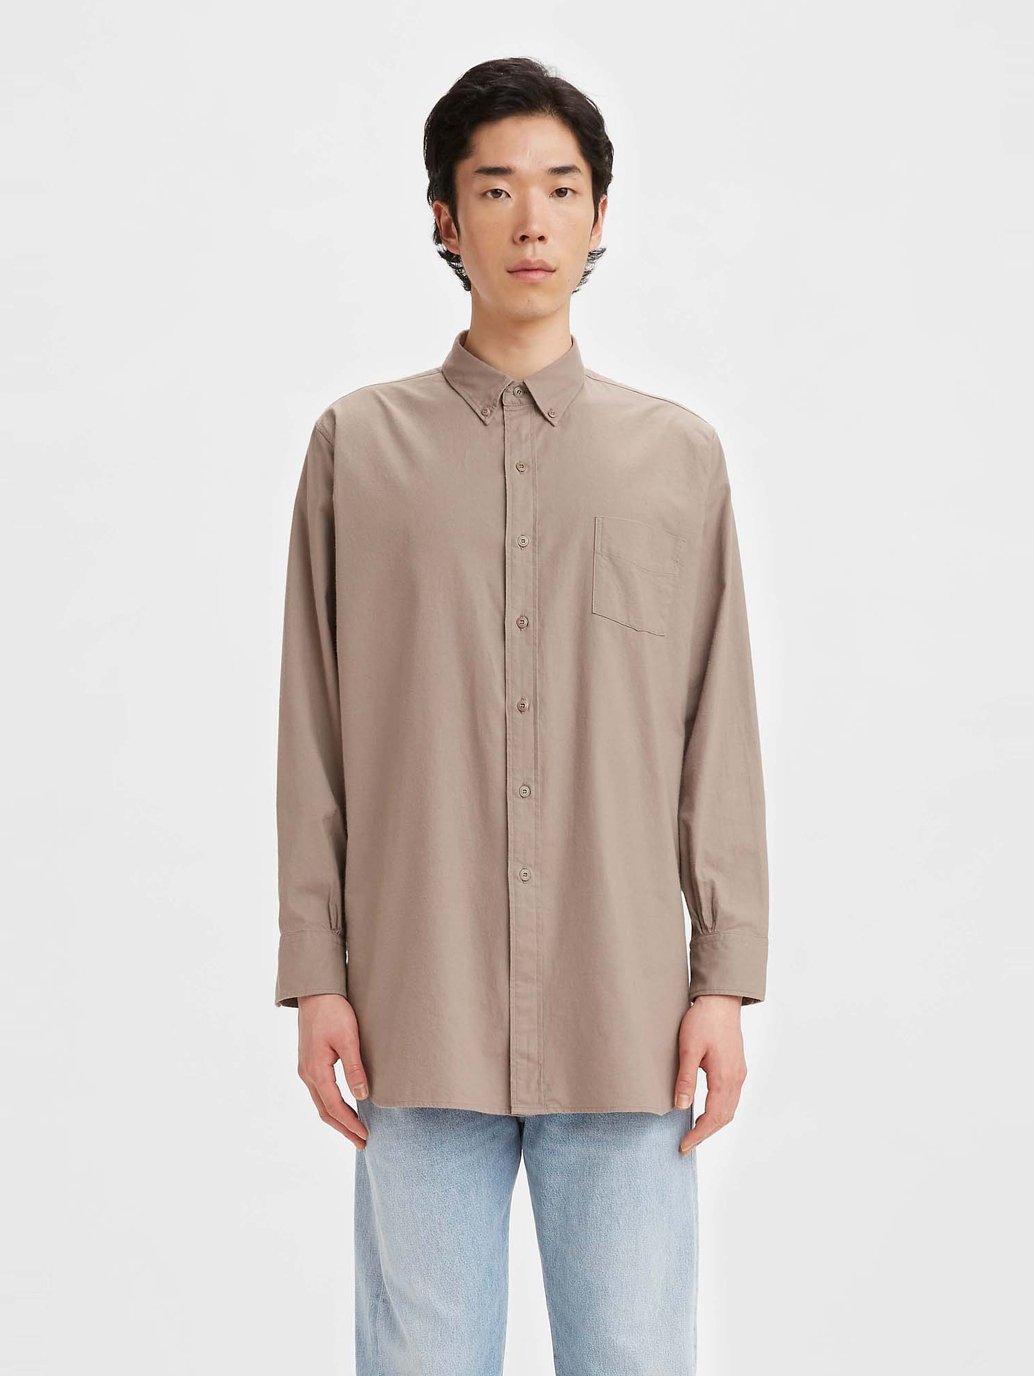 Buy Levi's® Made & Crafted® Men's Classic Long Sleeve Levi's® HK Official Online Shop